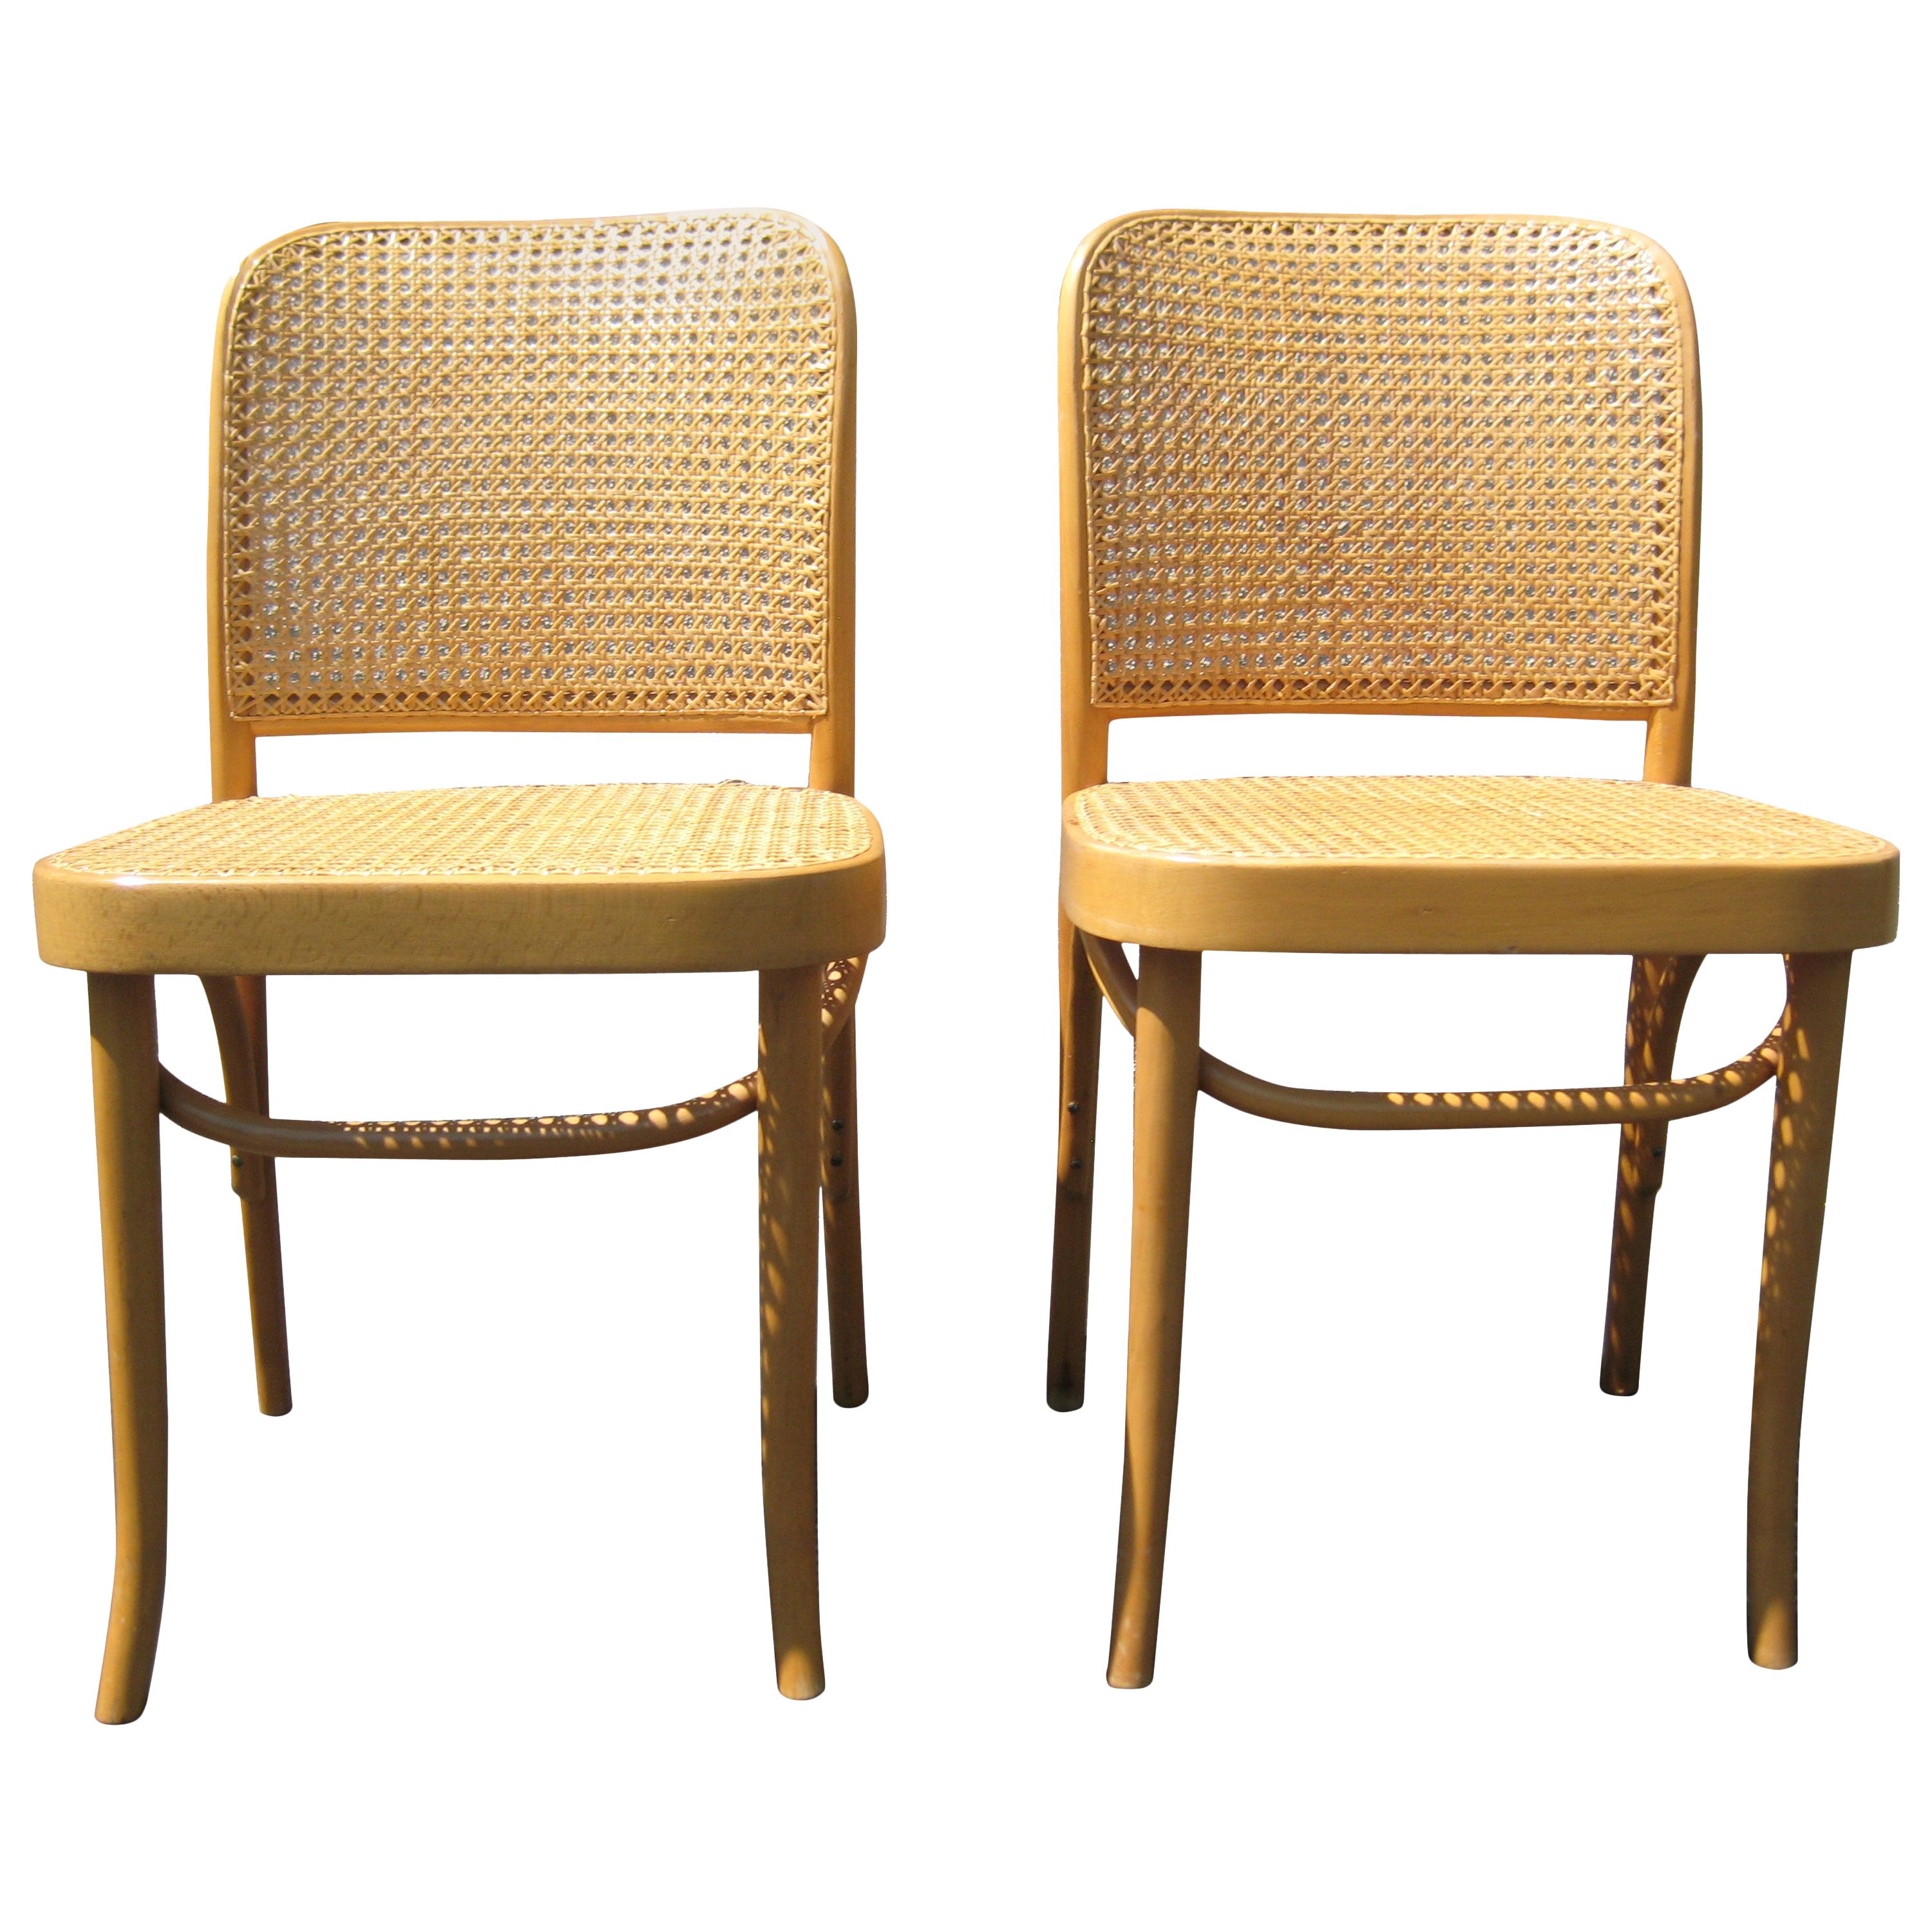 Pair of Josef Hoffmann Poland Cane Bentwood Side Chairs